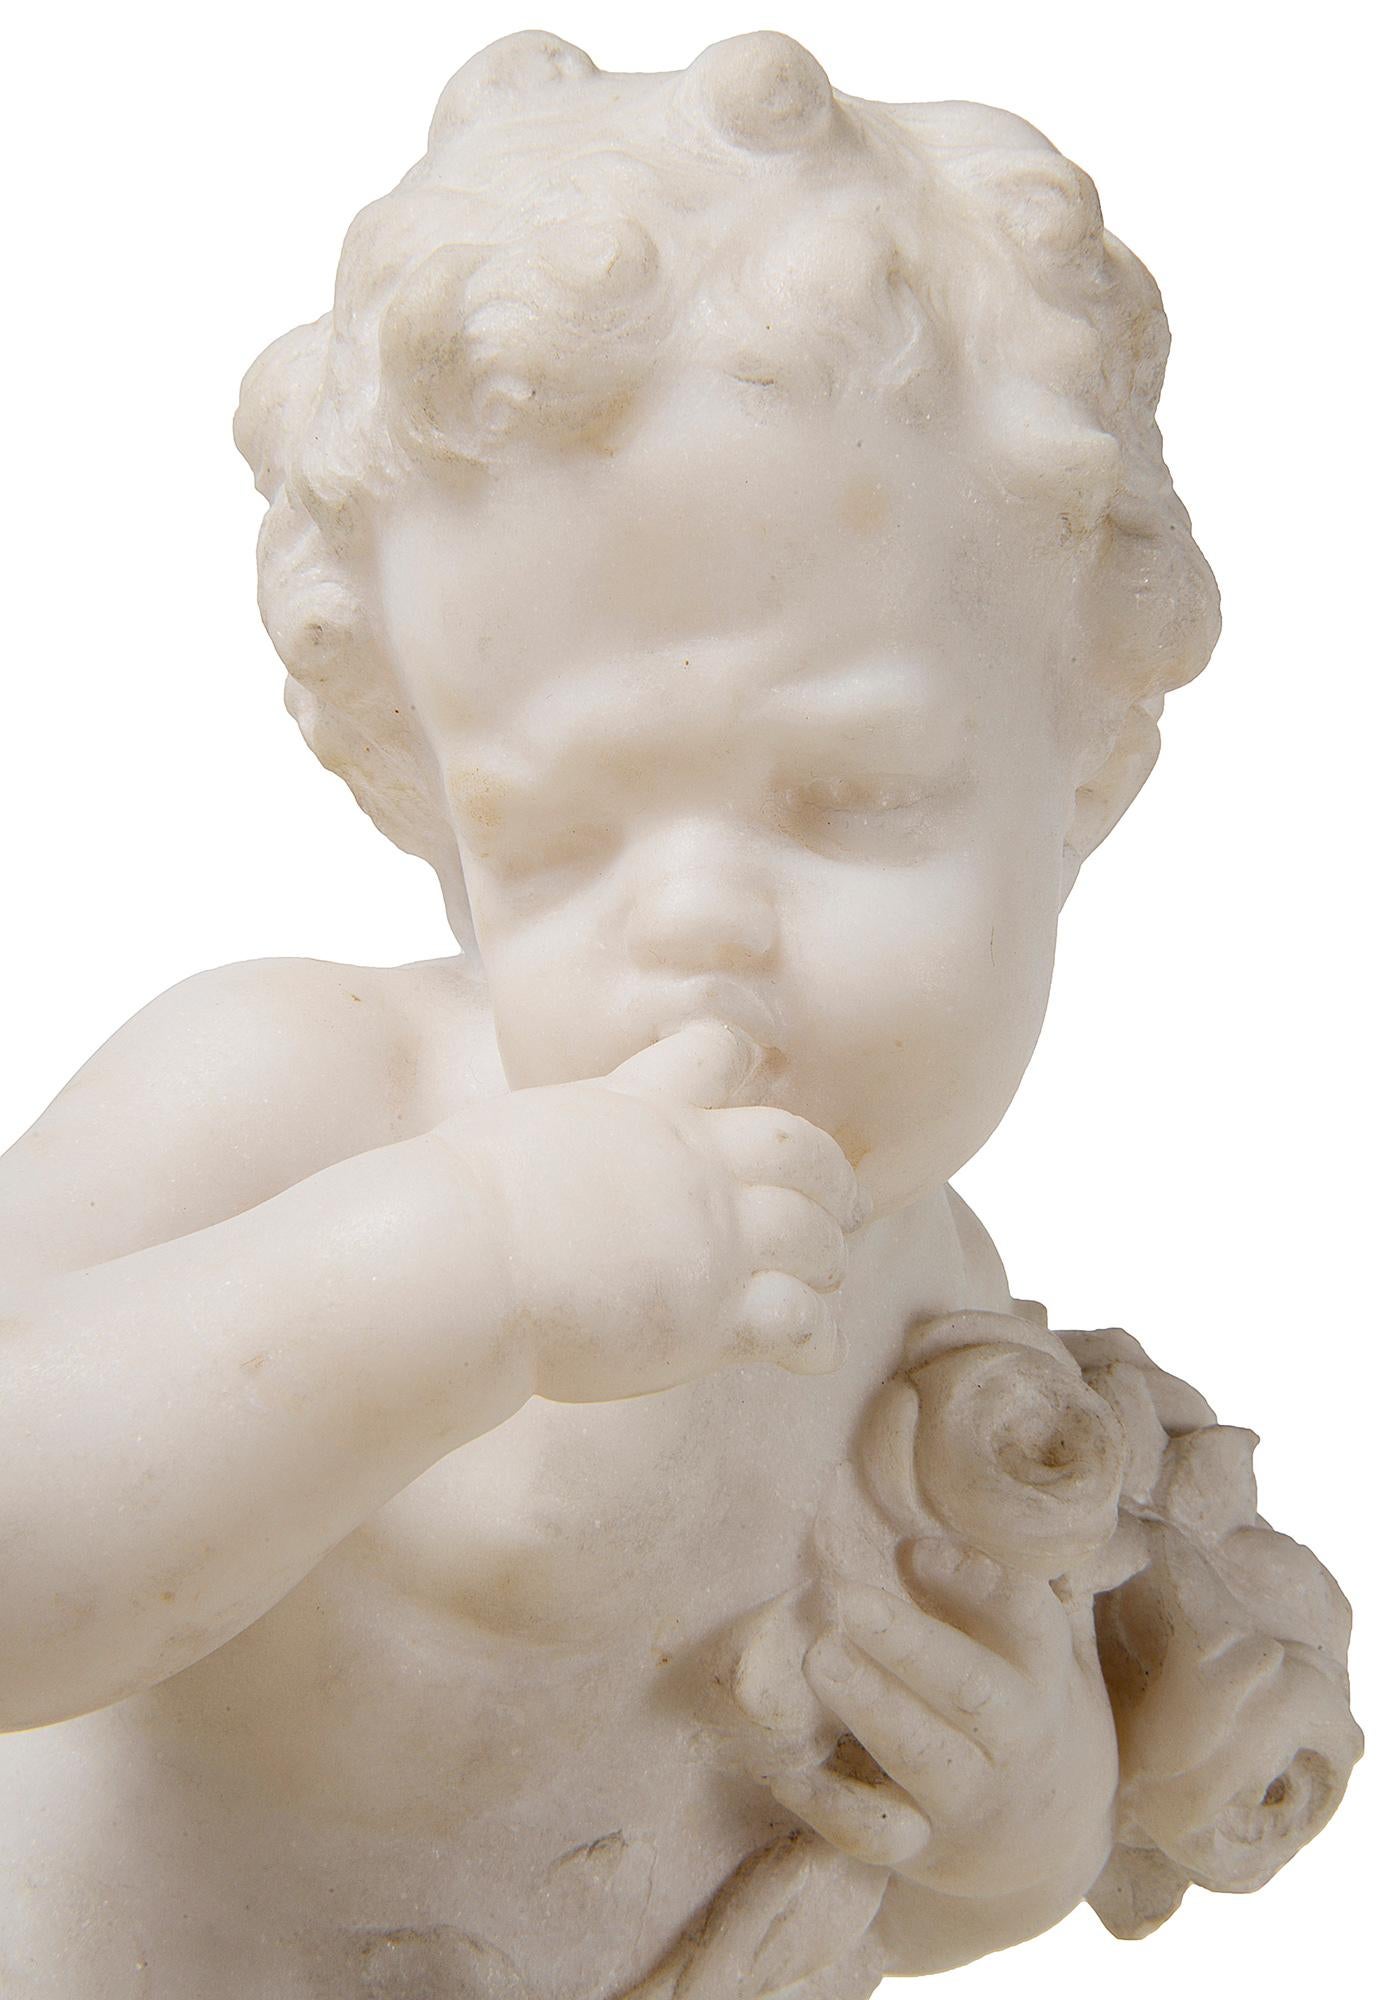 Italian 19th Century Marble Statue Seated Child Holding Flowers In Good Condition For Sale In Brighton, Sussex